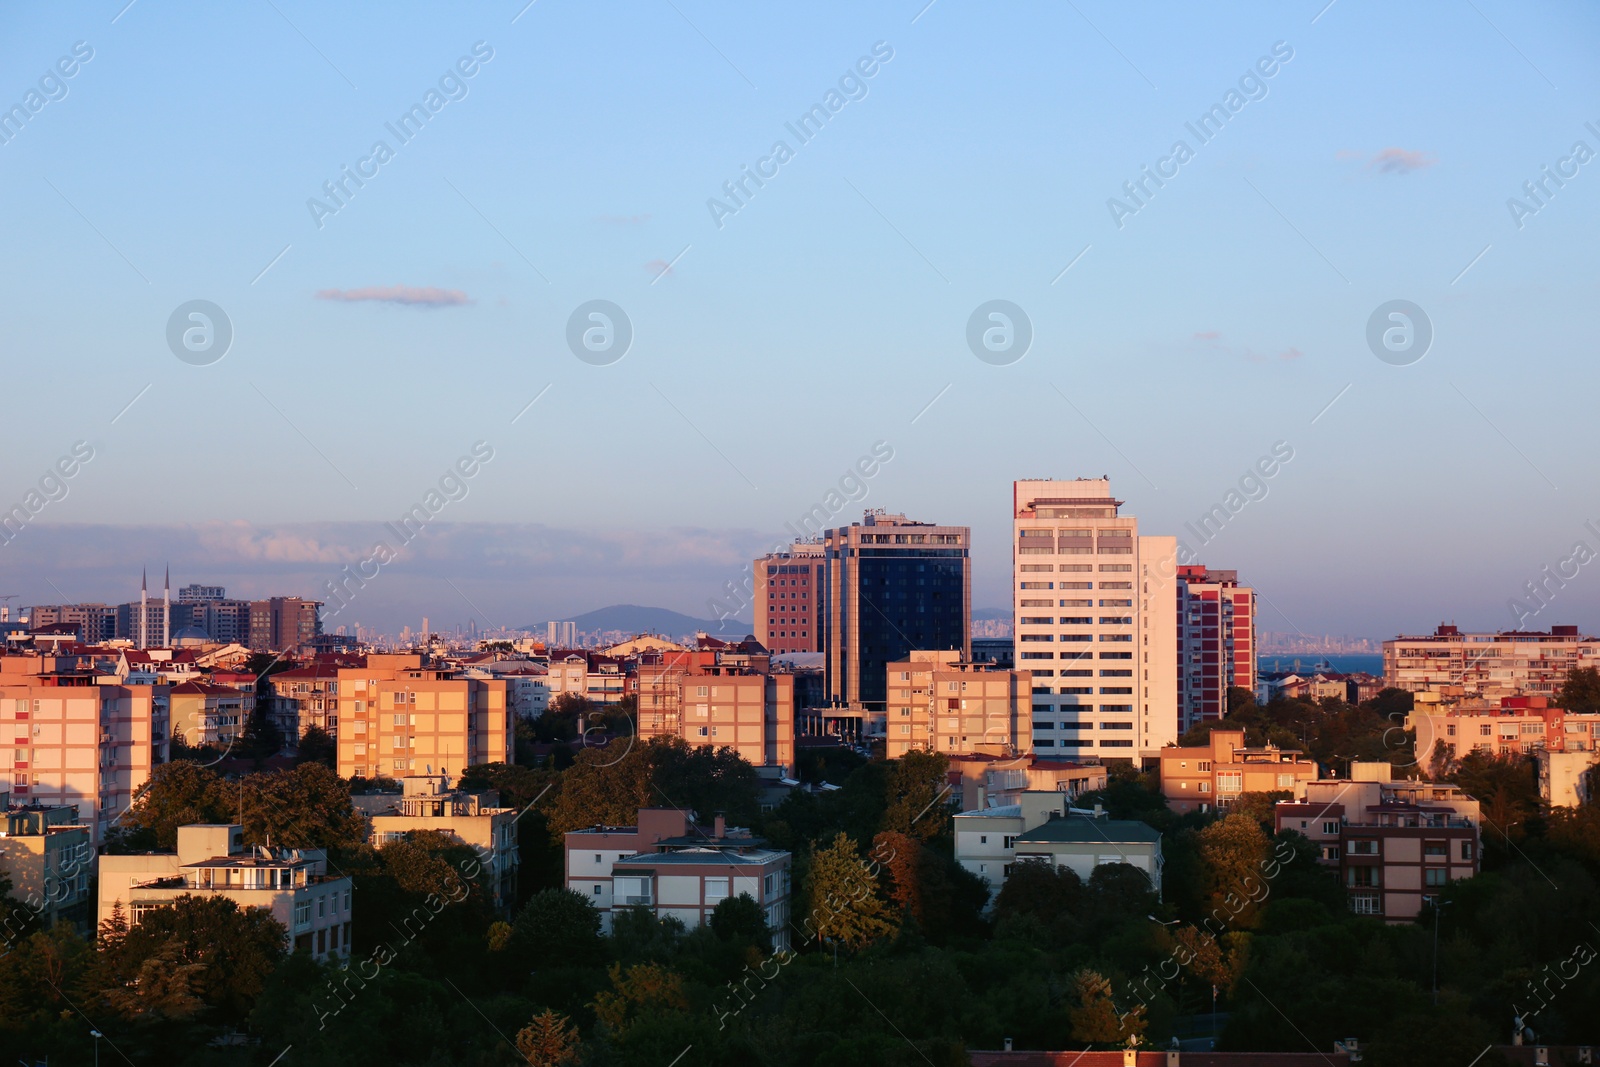 Photo of Picturesque view of city with beautiful buildings